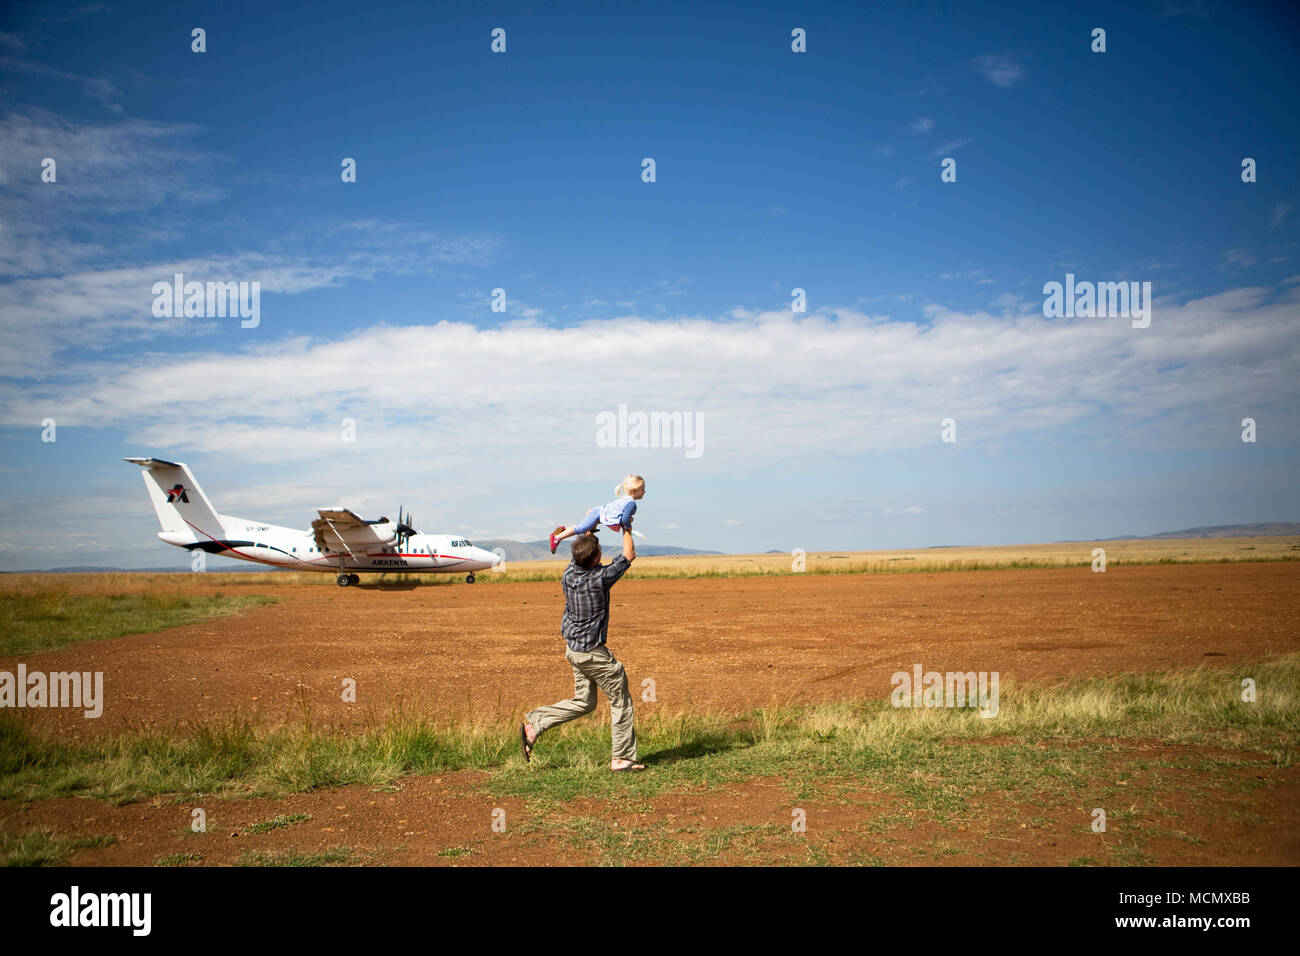 A father and his daughter play on the rustic runway in the Masai Mara, Kenya Stock Photo